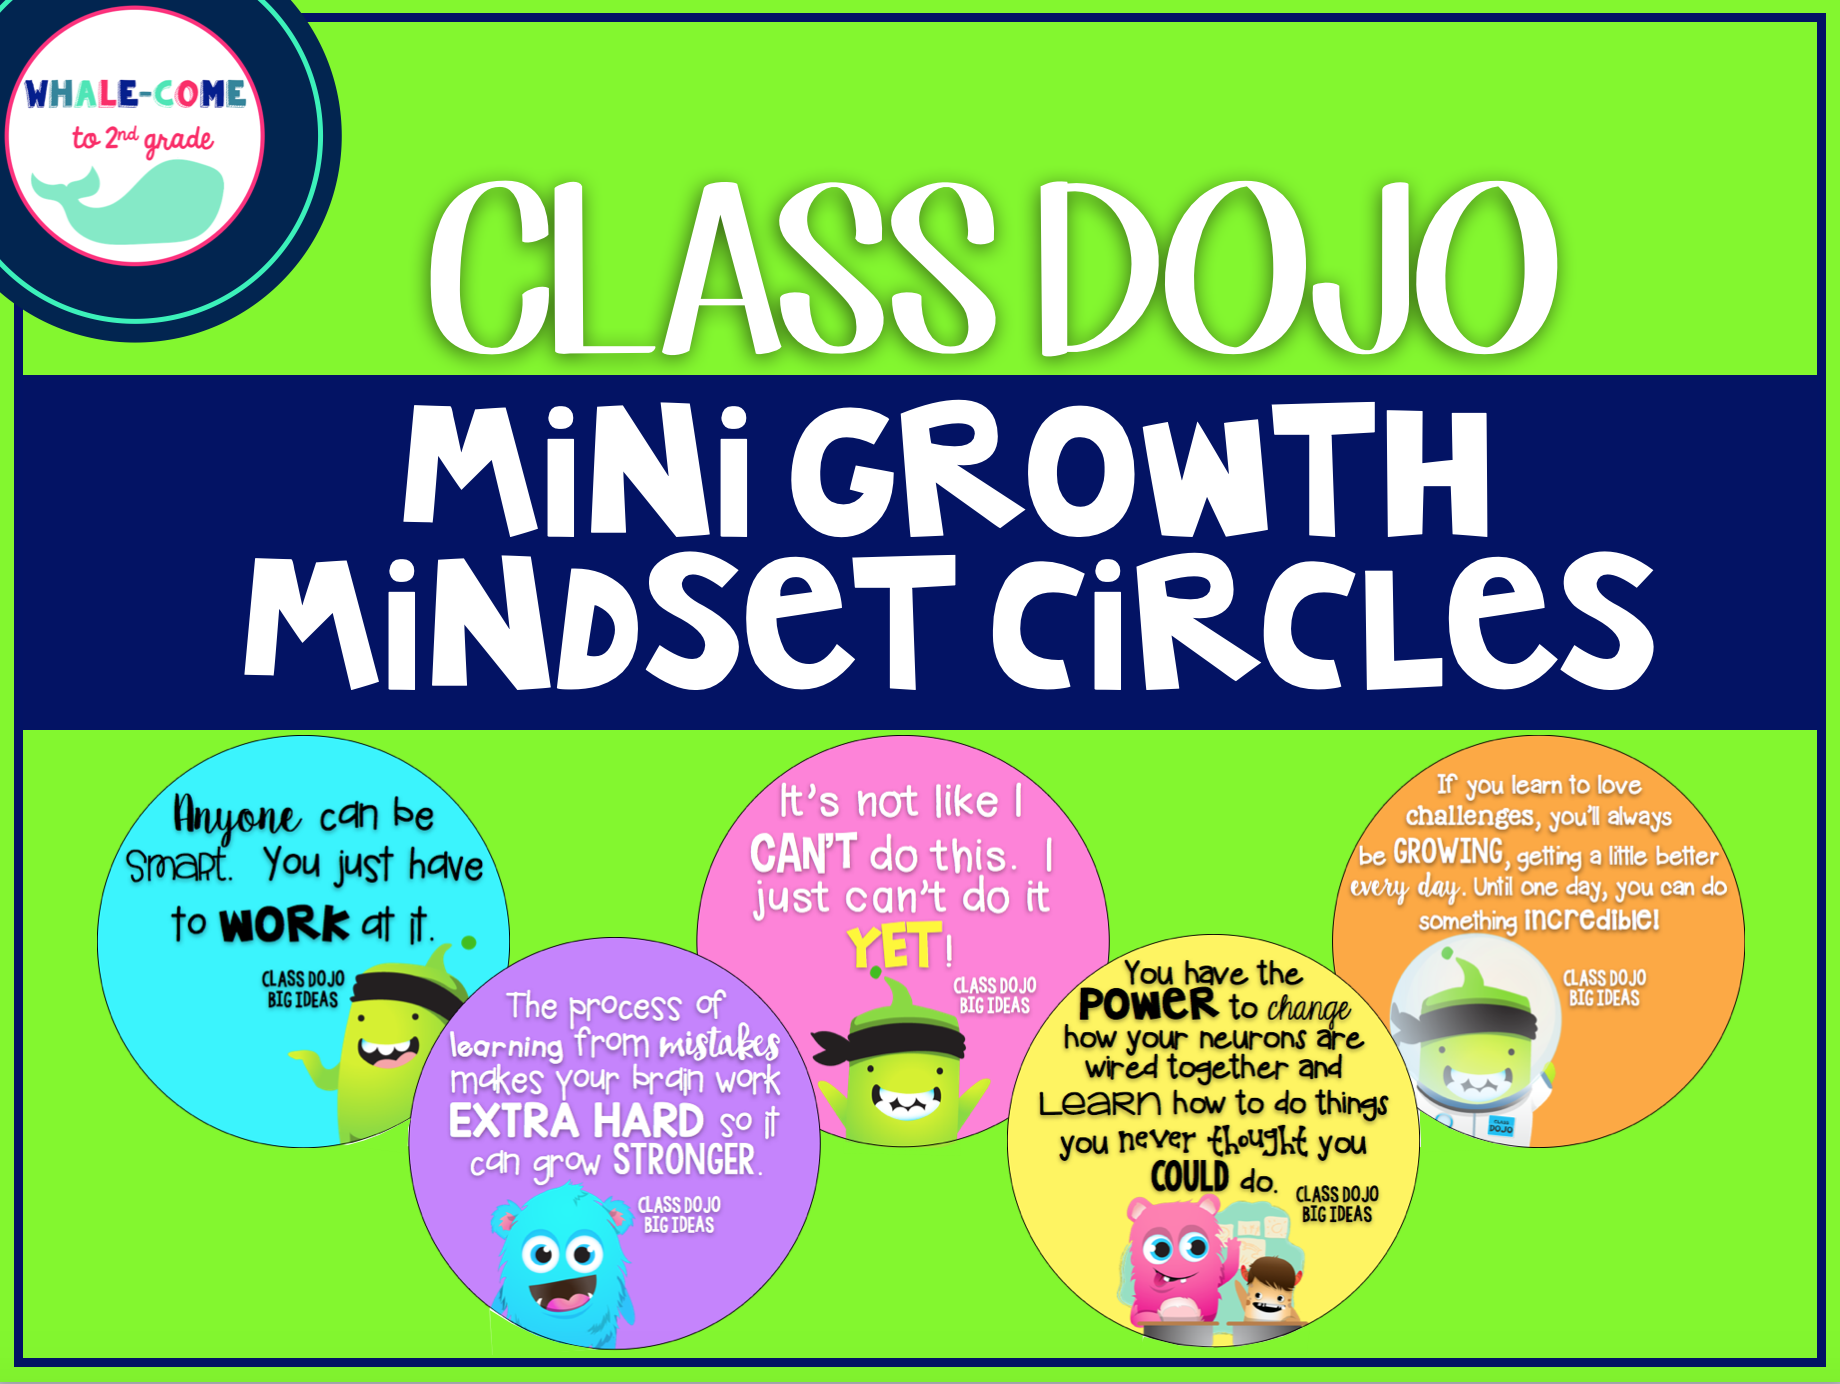 Are you using Class Dojo for 